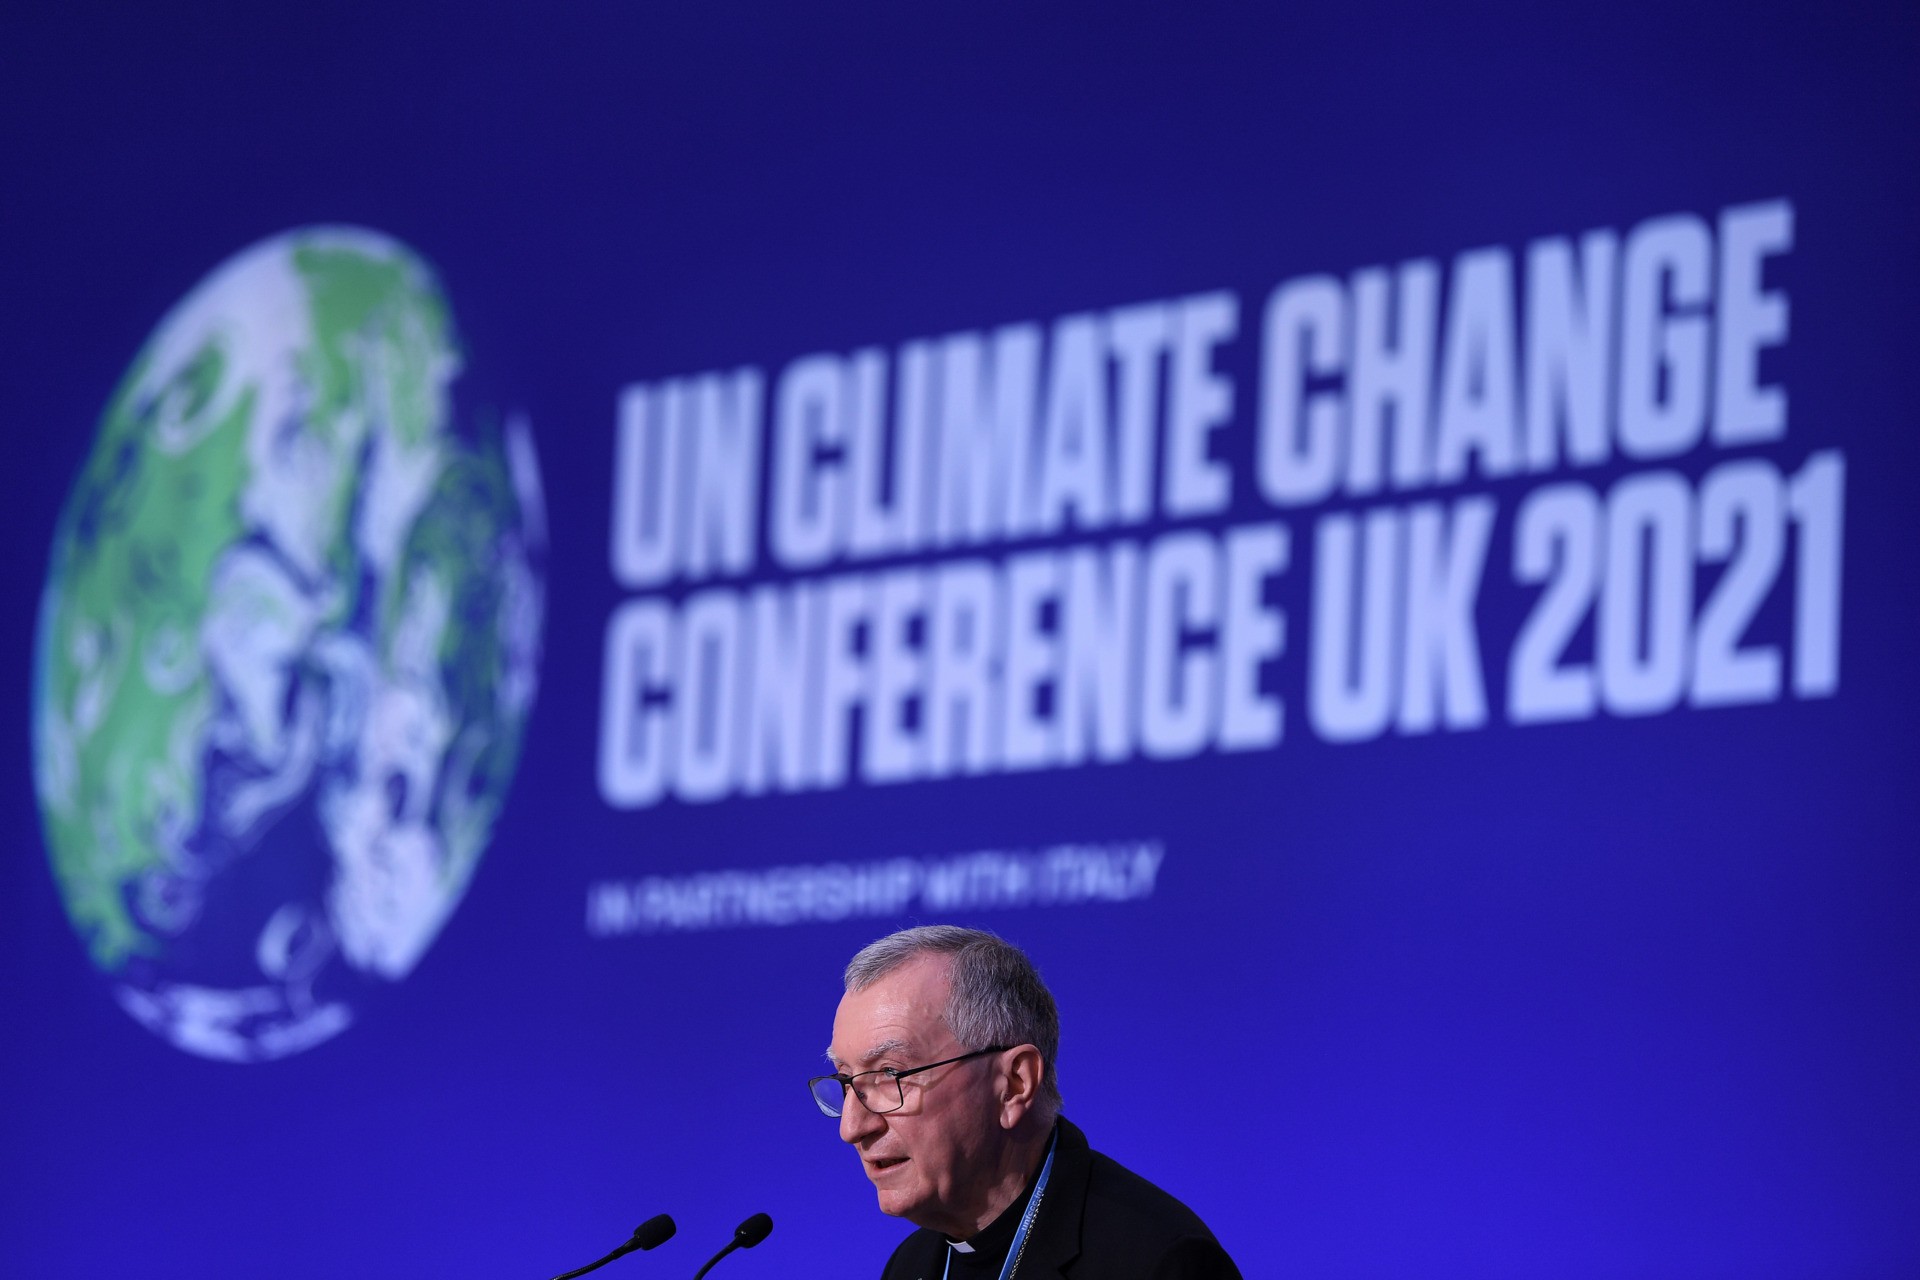 Vatican Secretary of State Cardinal Pietro Parolin speaks at the COP26 Summit, in Glasgow, Scotland, Tuesday, Nov. 2, 2021. The U.N. climate summit in Glasgow gathers leaders from around the world, in Scotland's biggest city, to lay out their vision for addressing the common challenge of global warming. (Daniel Leal Olivas /Pool Photo via AP)